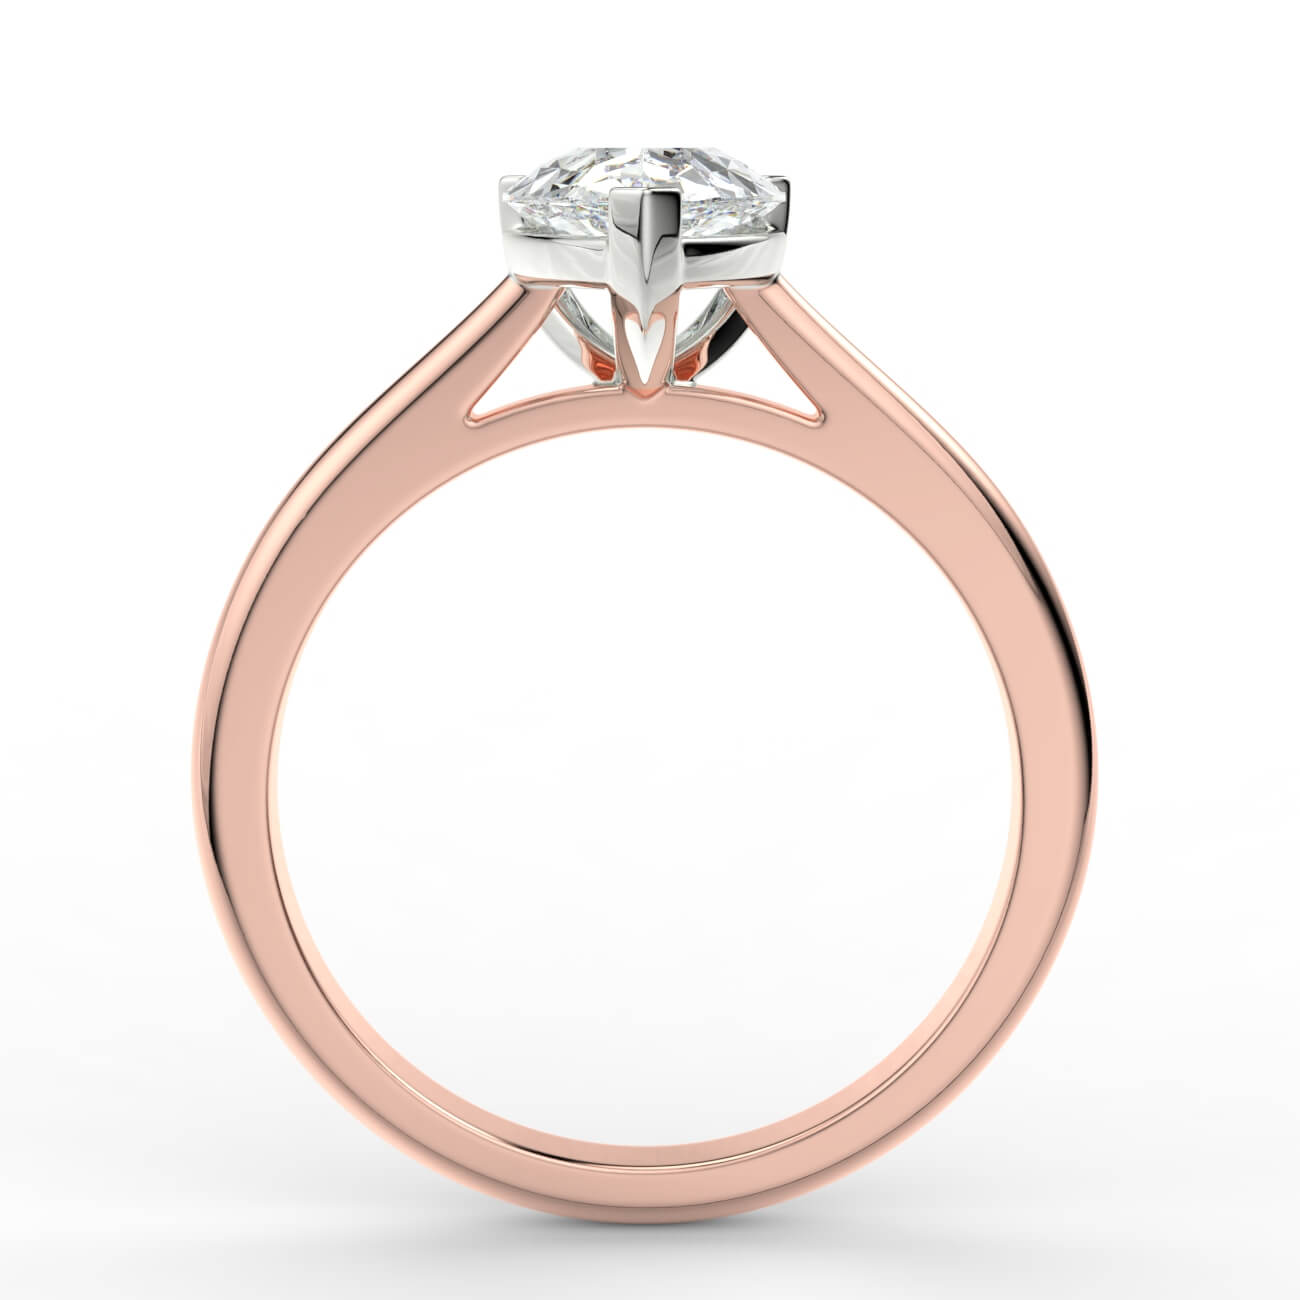 Pear cut diamond cathedral engagement ring in rose and white gold – Australian Diamond Network